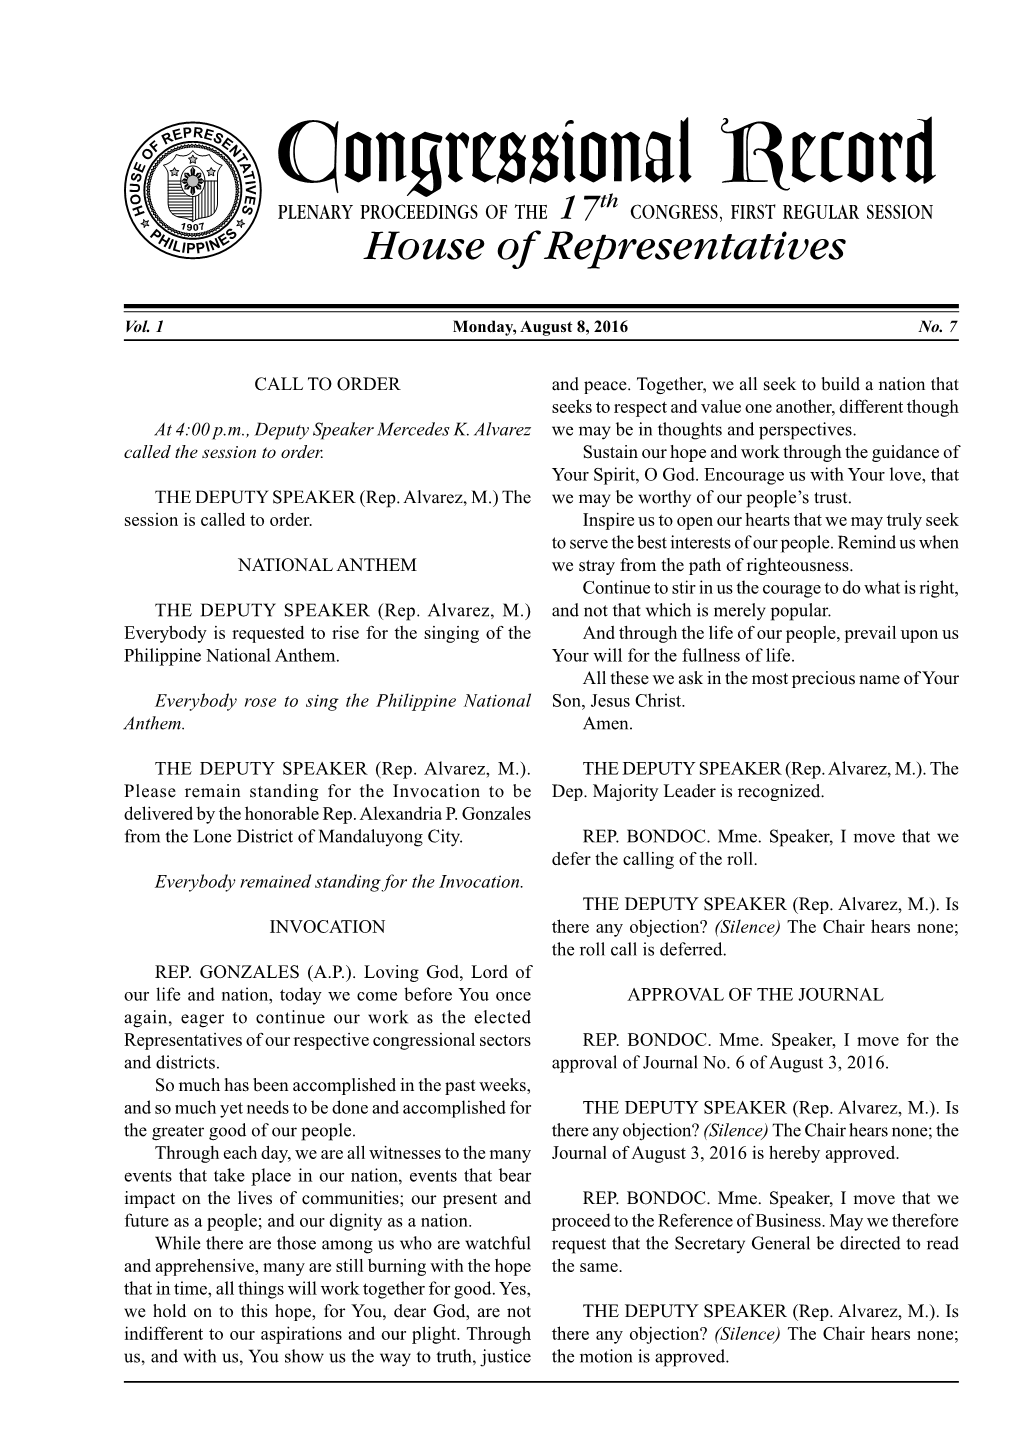 Congressional Record O H Th PLENARY PROCEEDINGS of the 17 CONGRESS, FIRST REGULAR SESSION 1 P 907 H S ILIPPINE House of Representatives